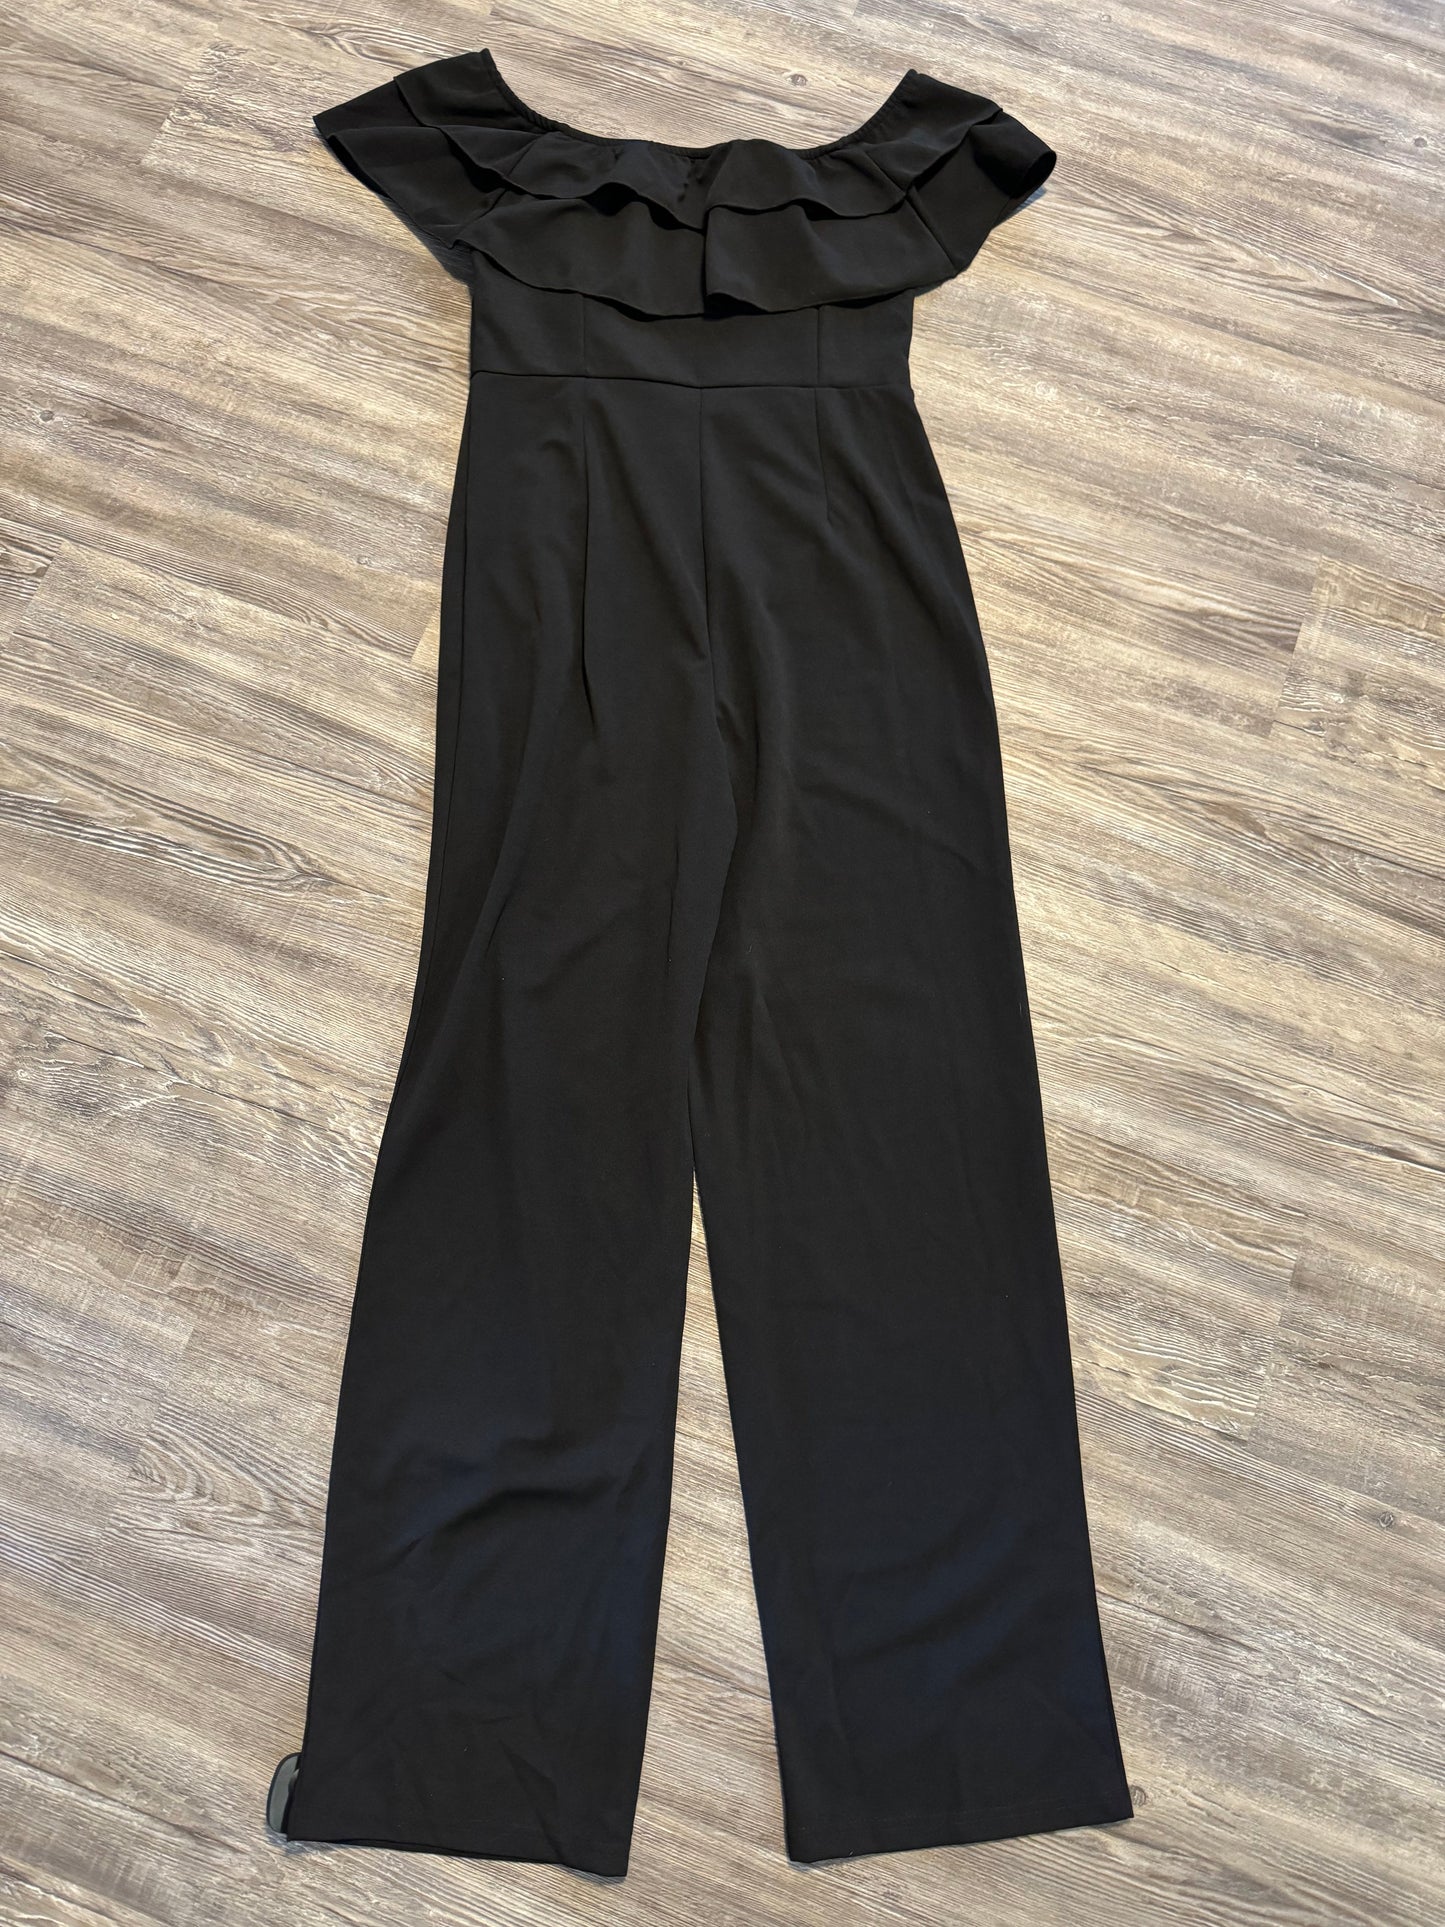 Jumpsuit By Shein  Size: M